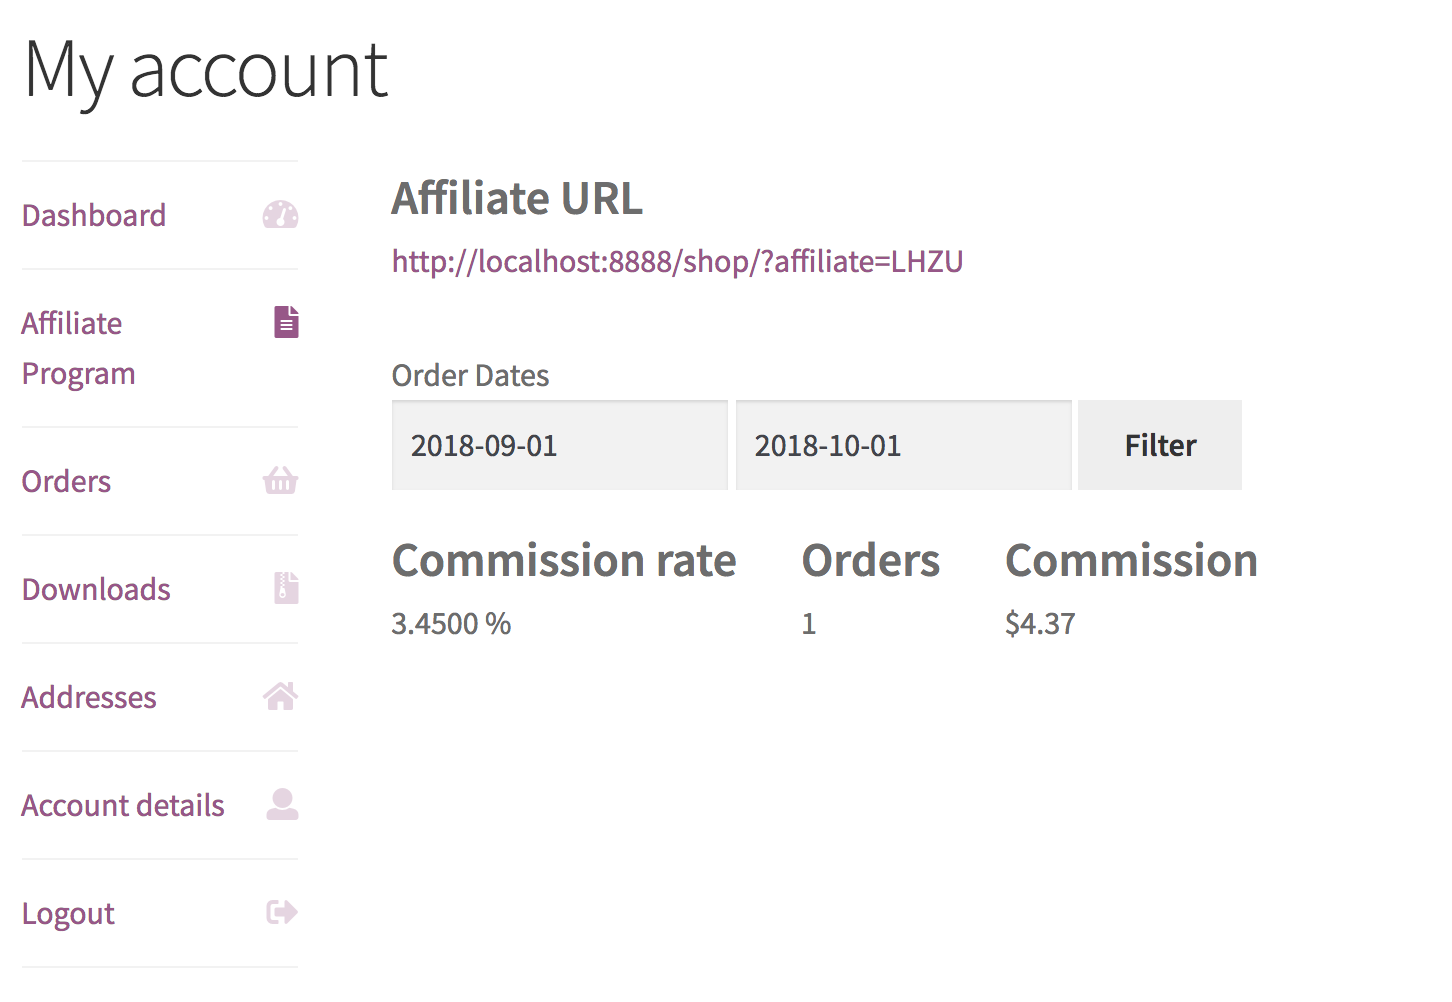 Affiliates can view their own stats